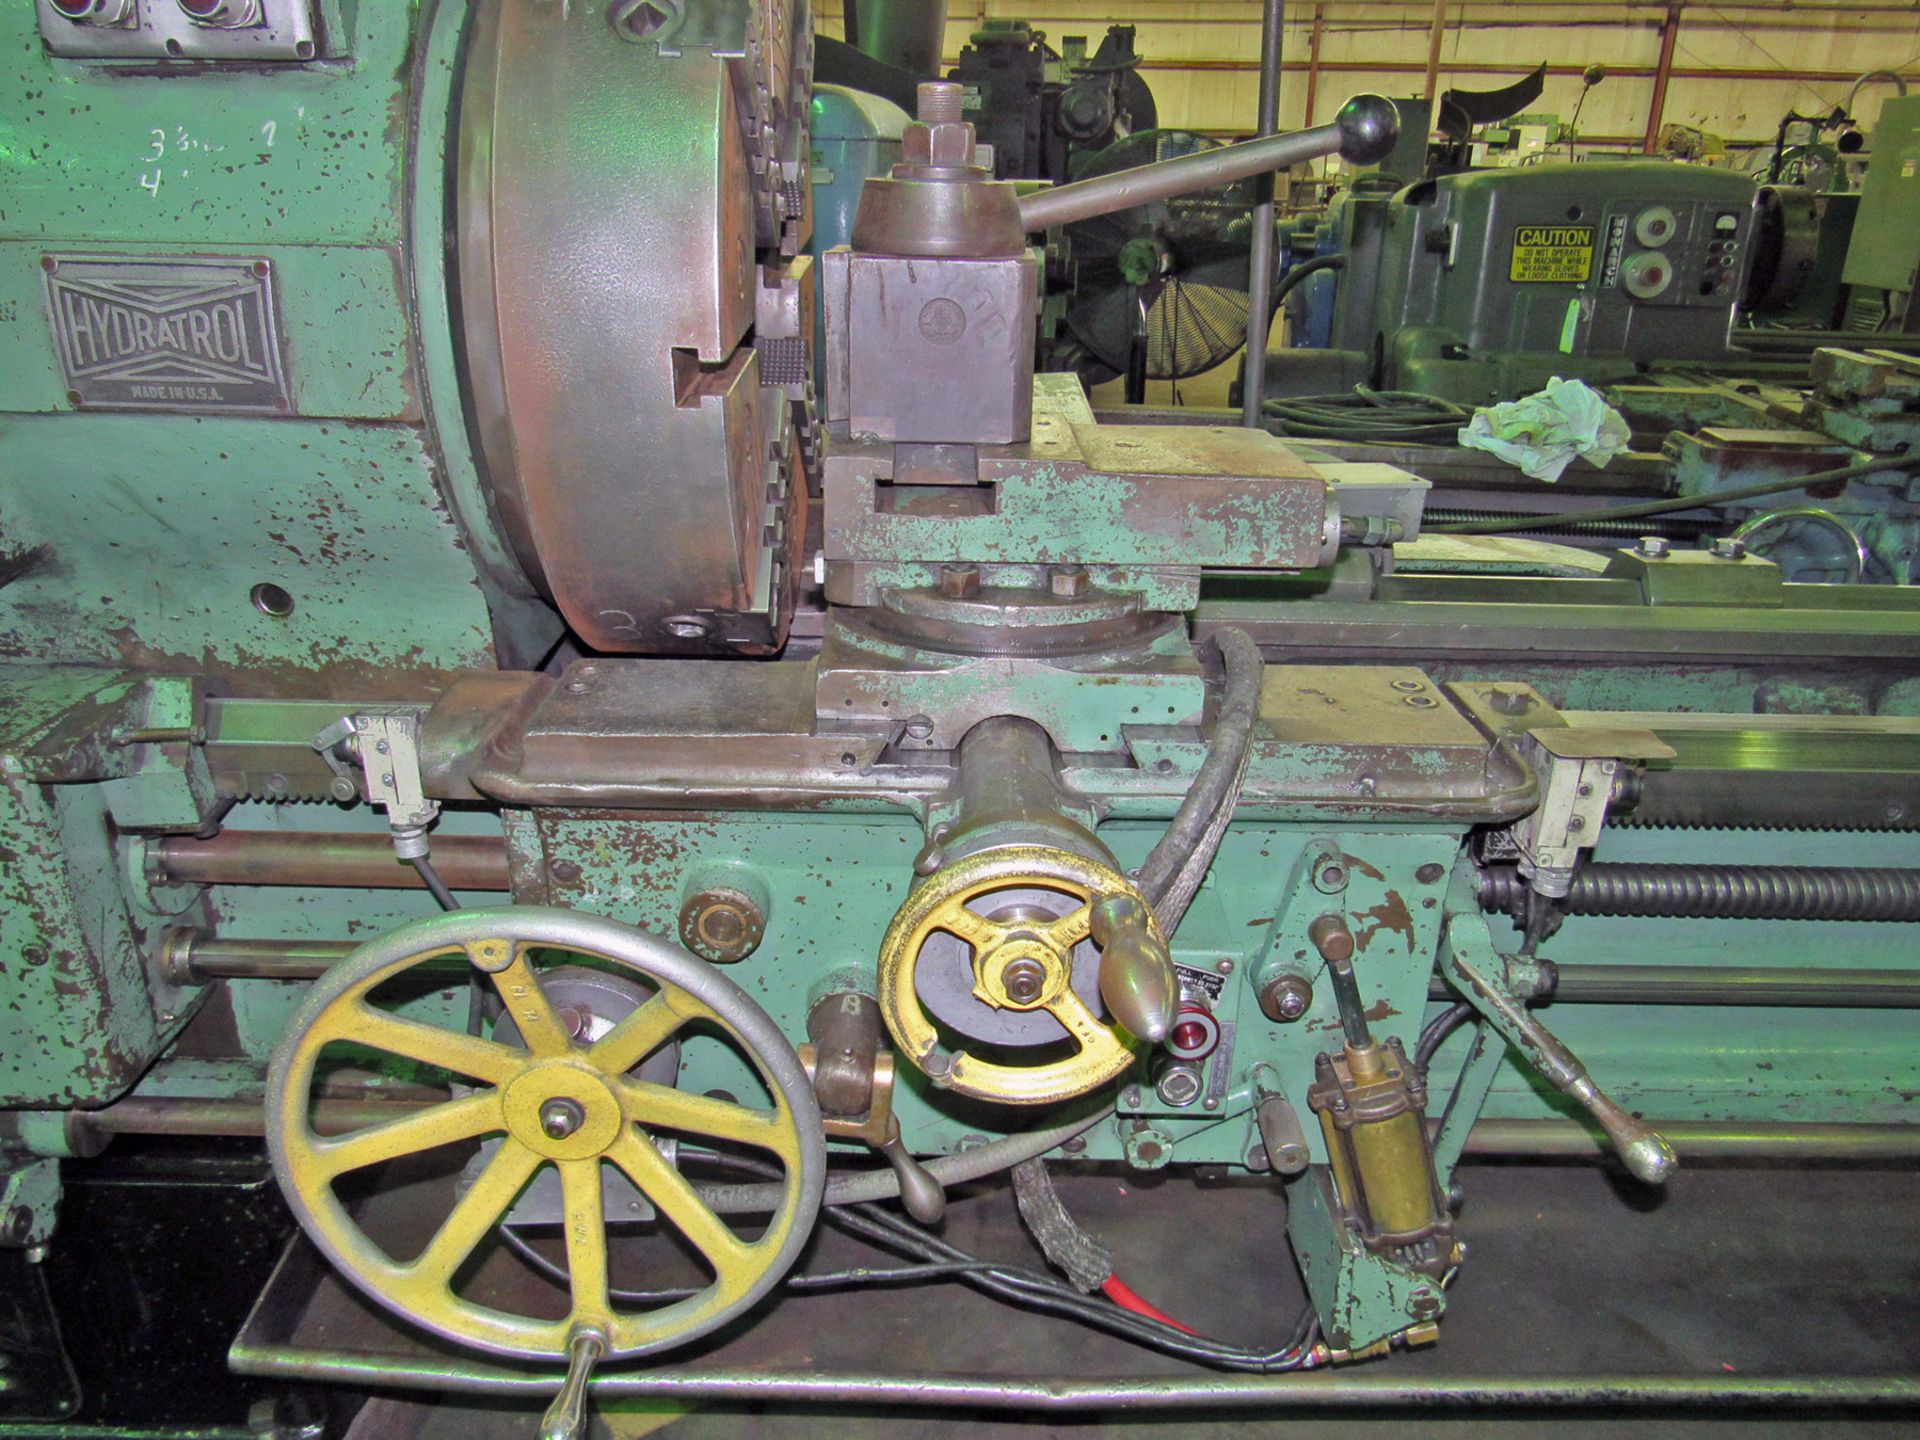 24" X 120" LEHMANN HOLLOW SPINDLE LATHE WITH 12" SPINDLE BORE - Image 7 of 11